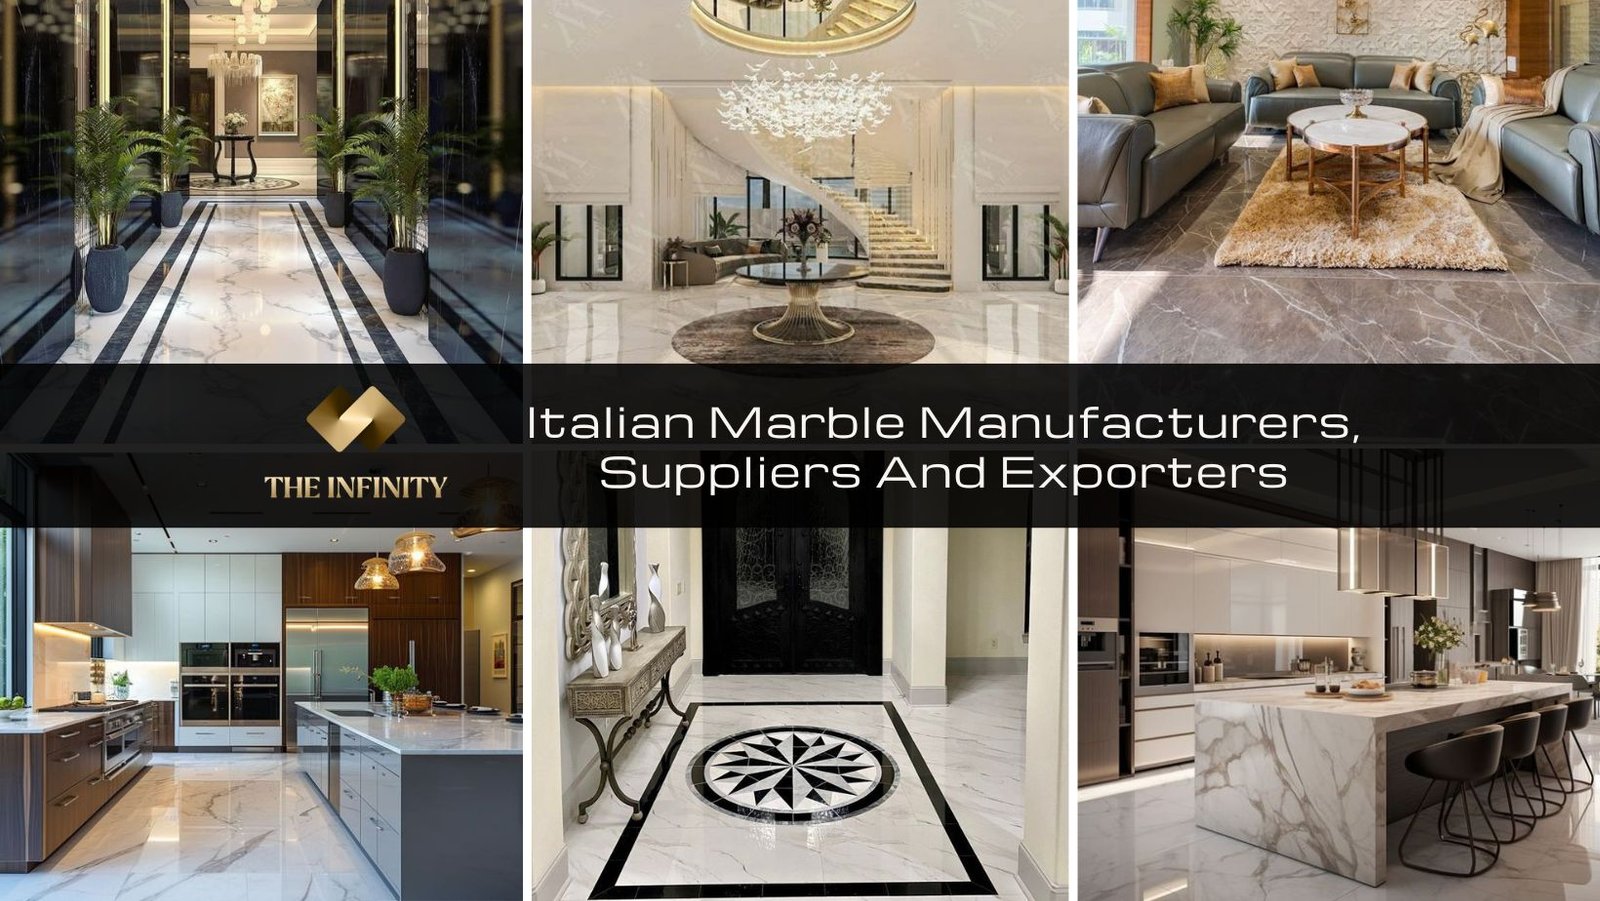 Italian Marble Manufacturers, Suppliers And Exporters